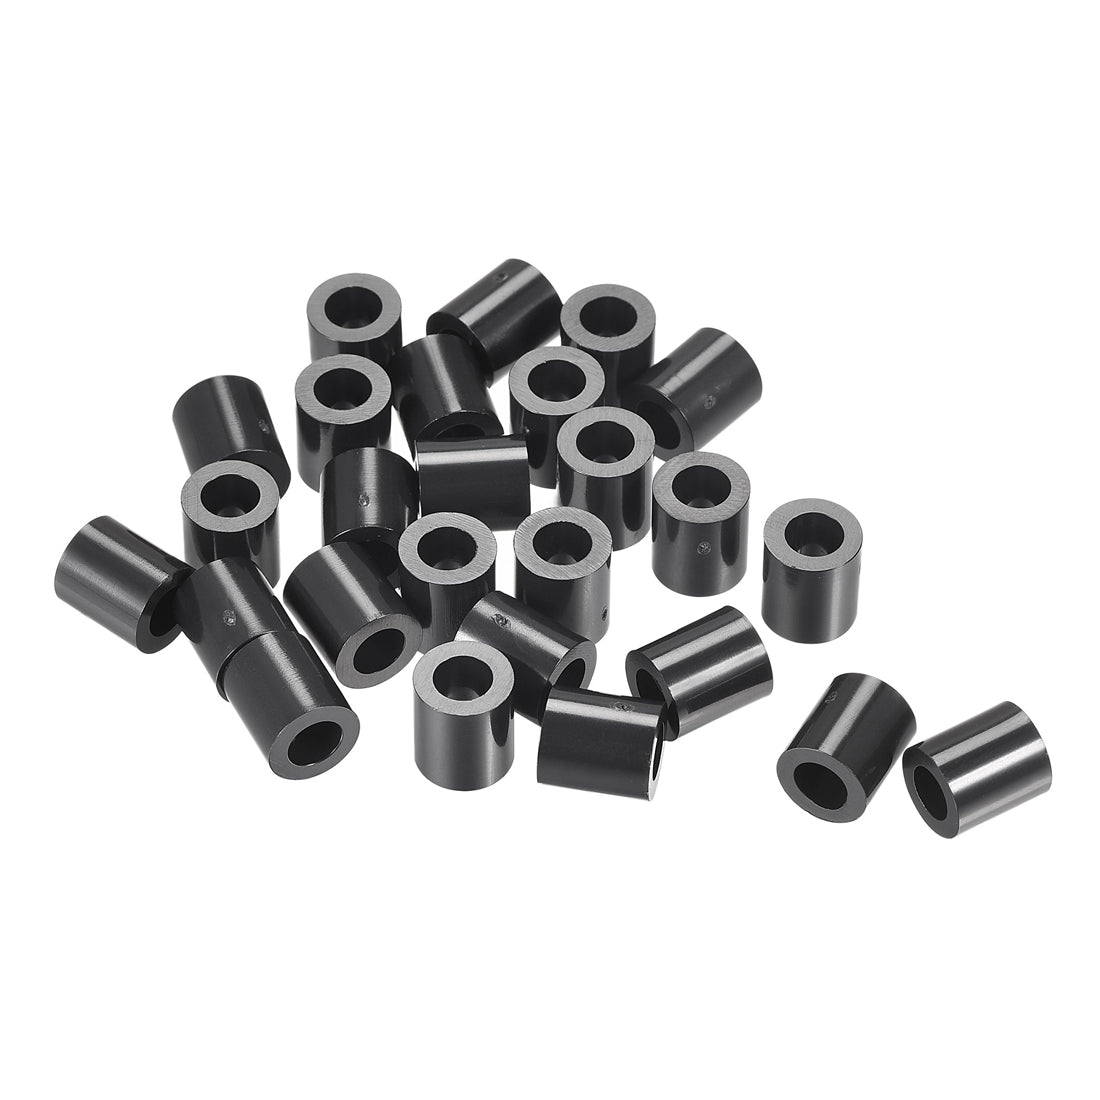 Uxcell Uxcell ABS Round Spacer Washer ID 4.2mm OD 7mm L 9mm for M4 Screws, Black, 100Pcs